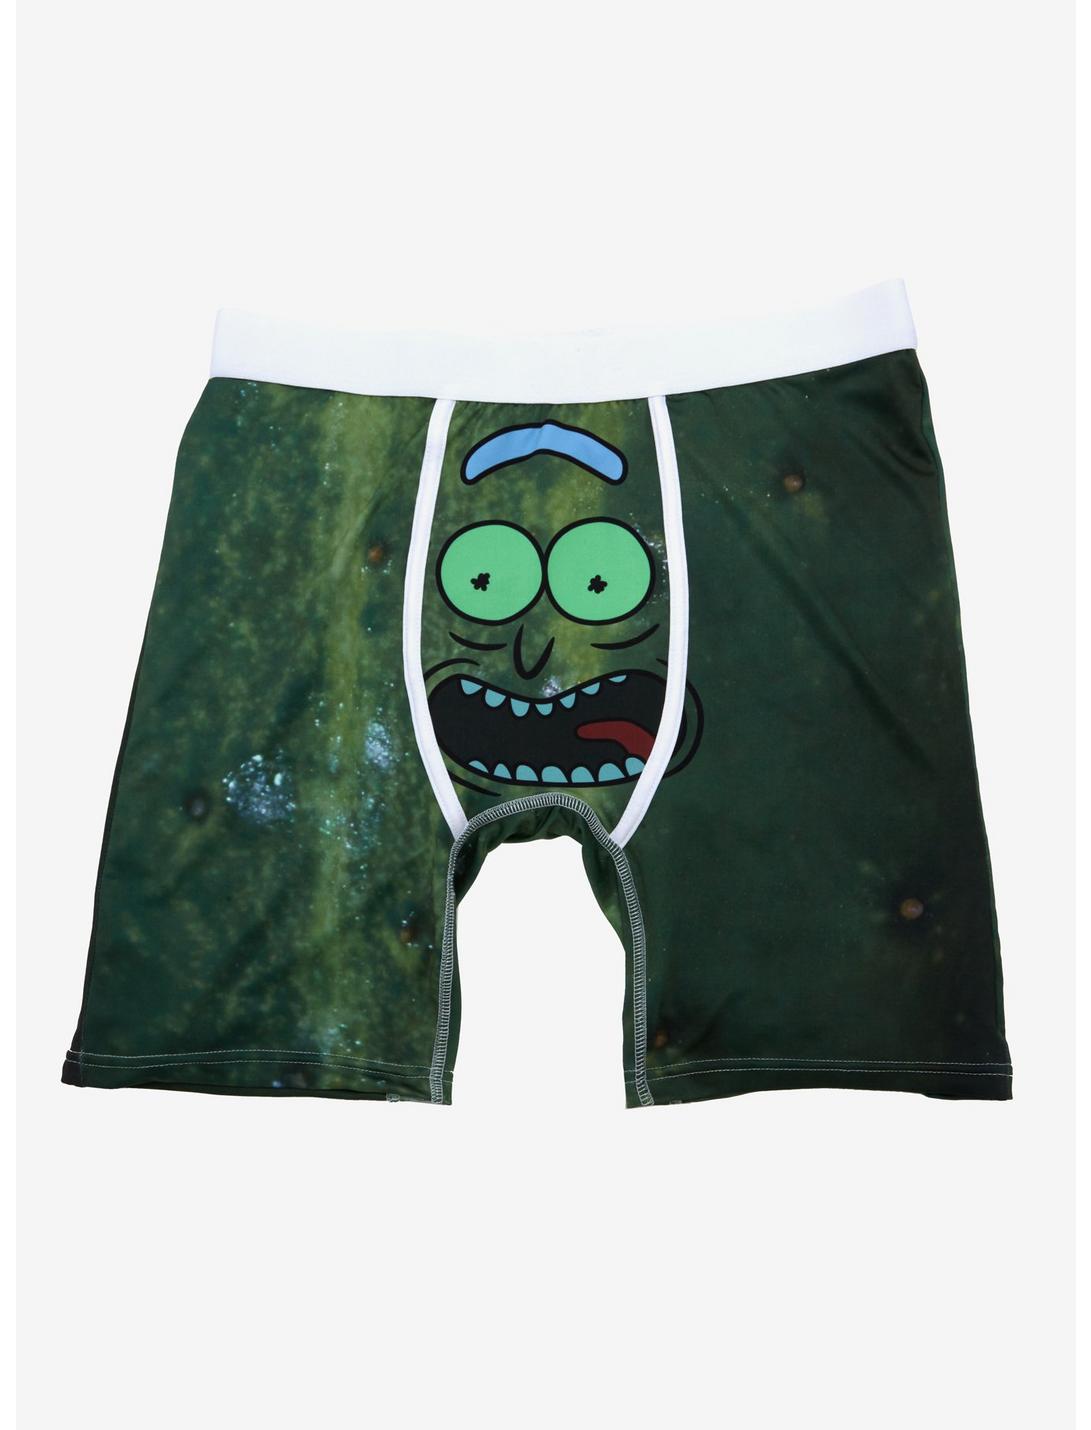 Rick And Morty Pickle Rick Face Boxer Briefs, MULTI, hi-res